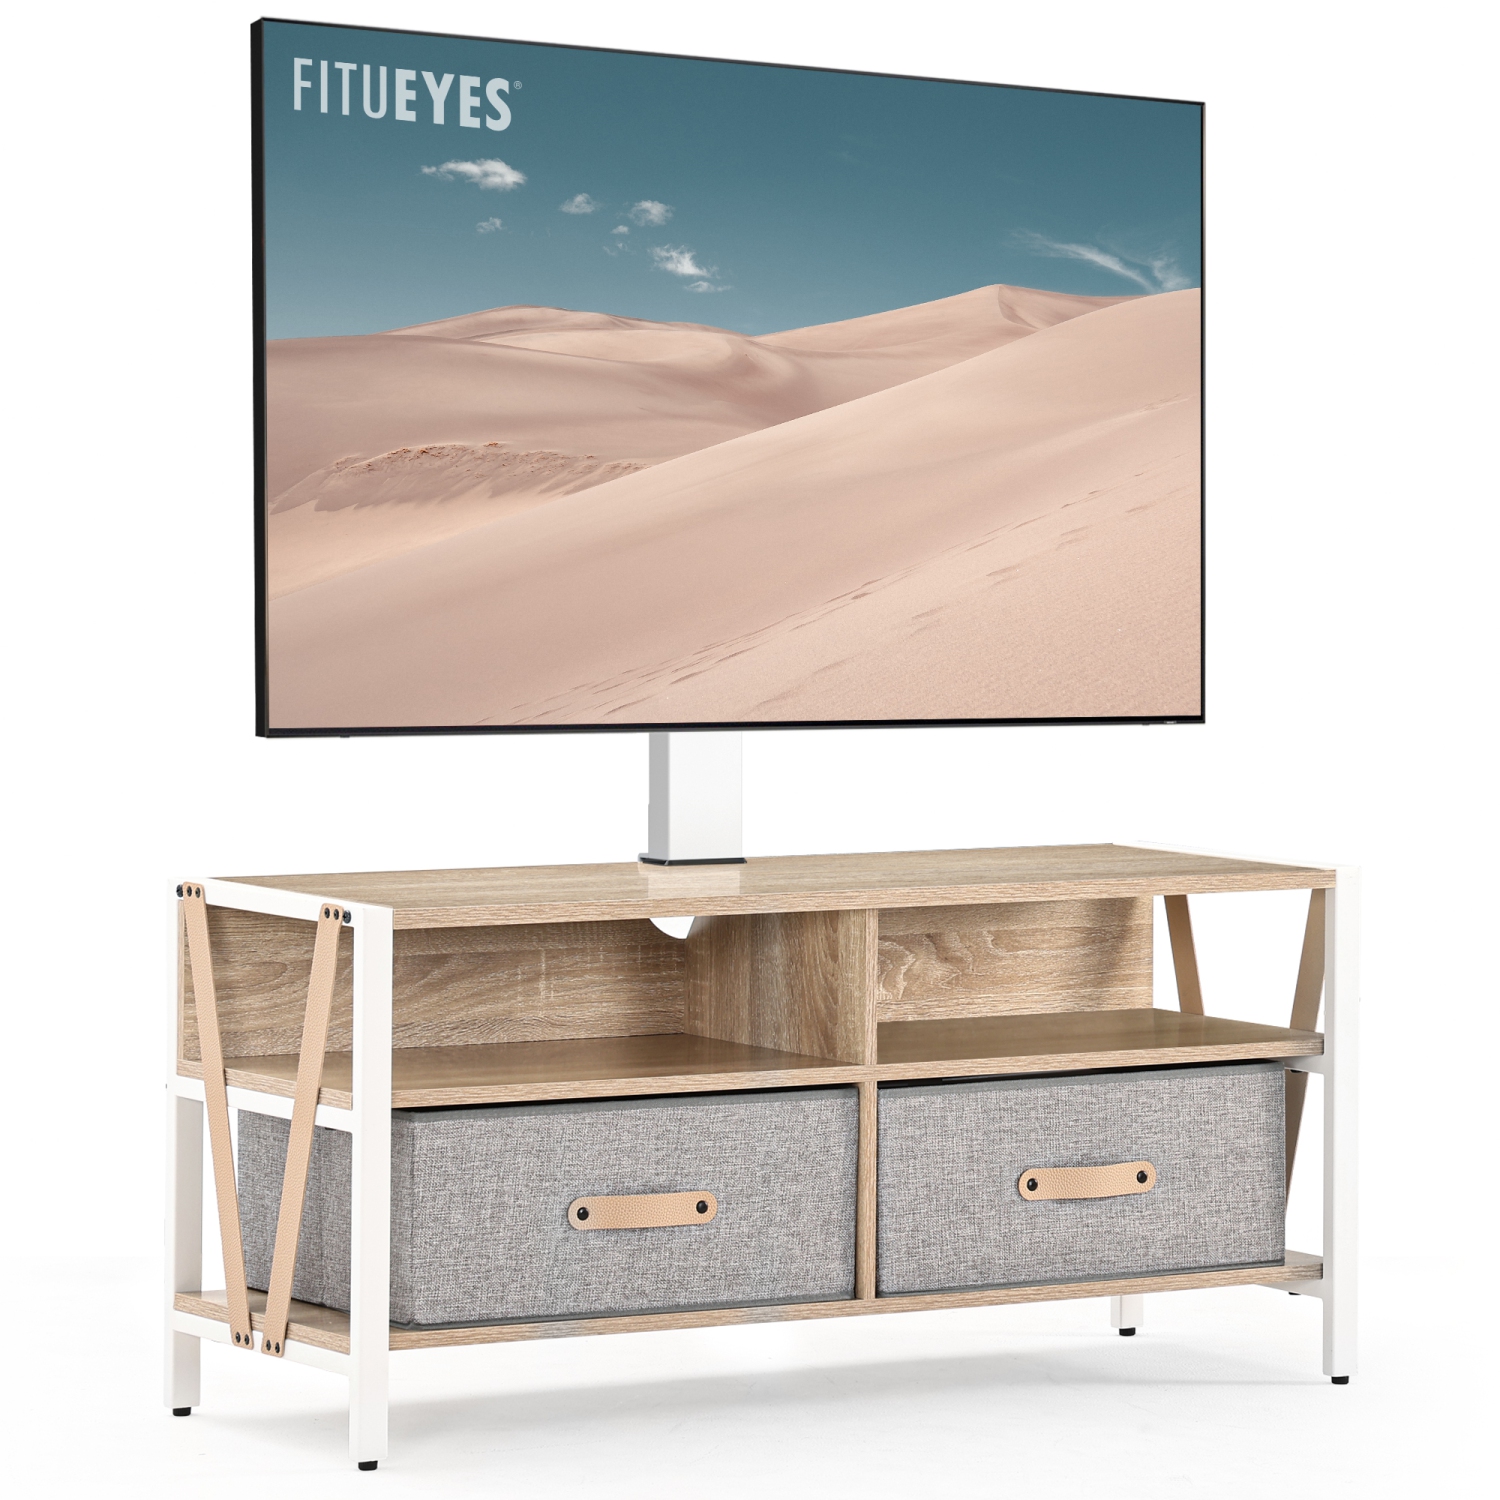 FITUEYES White TV Stand Wood with Swivel Mount for 37-75 Inch TV, Entertainment Center Table with Removable Fabric Drawers Storage & Height Adjustable Max VESA 600x400mm